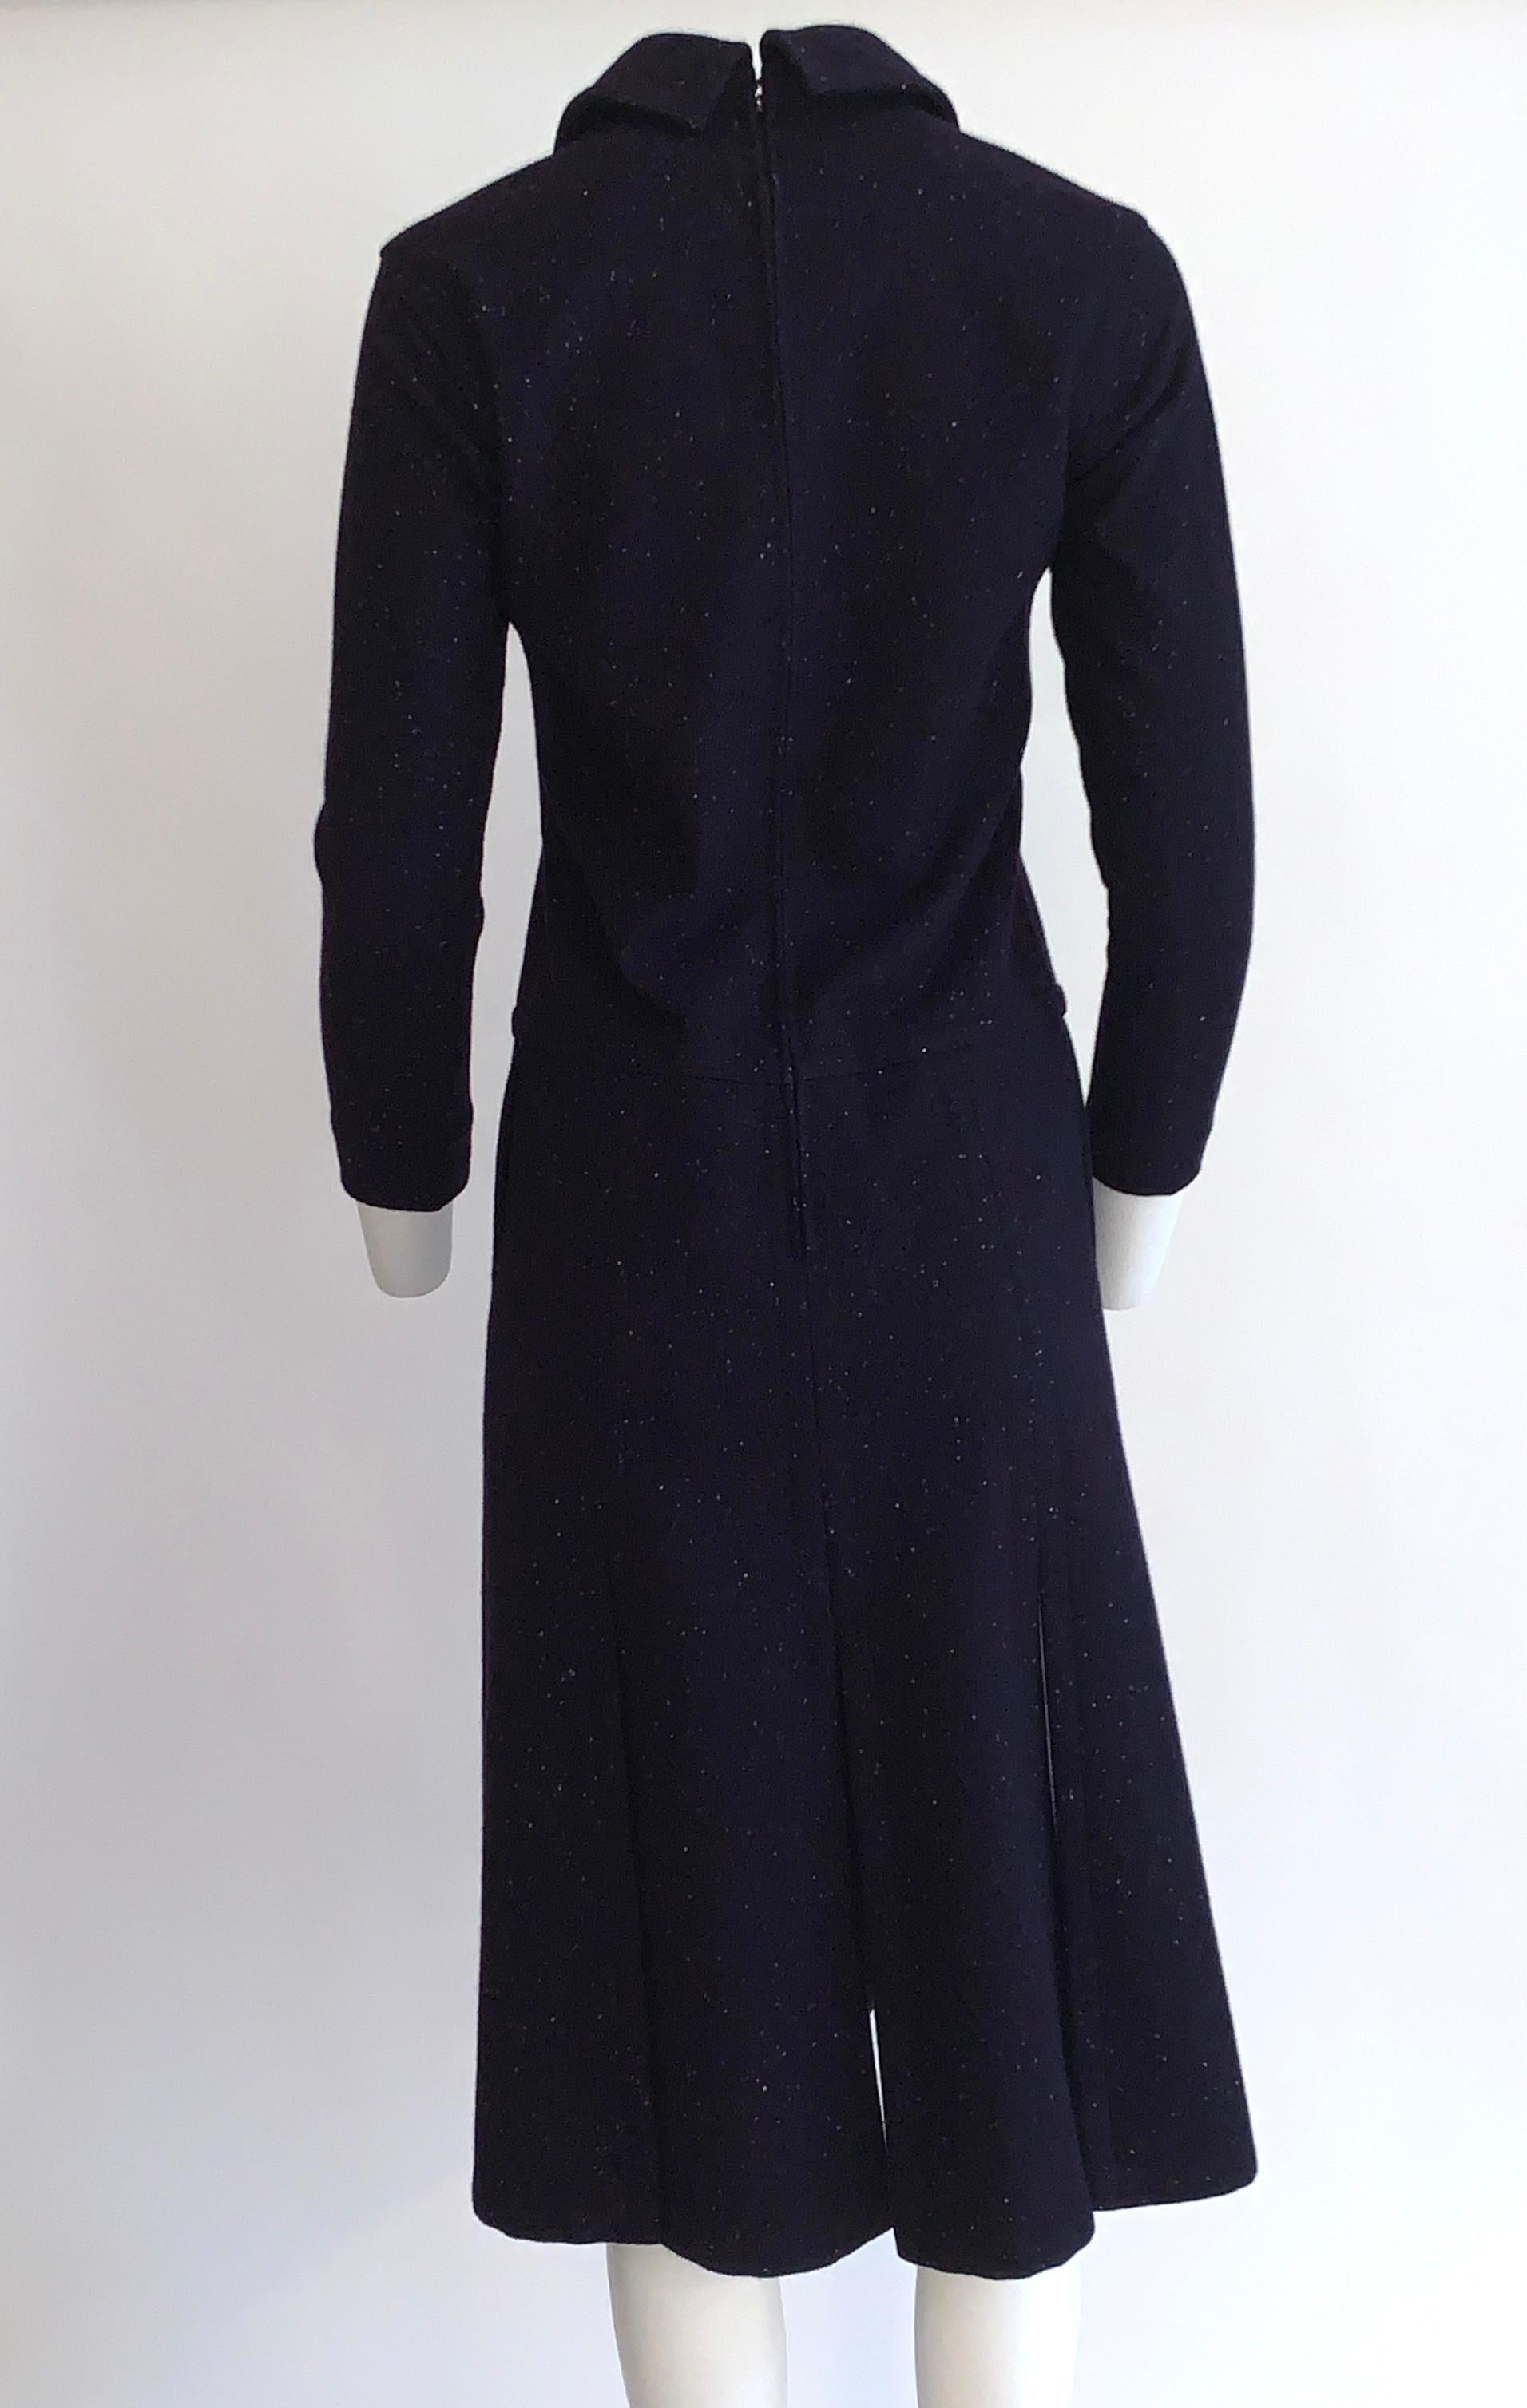 Galanos for Amelia Gray 1960s Blue Wool Speckled Shirt Dress with Pockets In Excellent Condition For Sale In San Francisco, CA